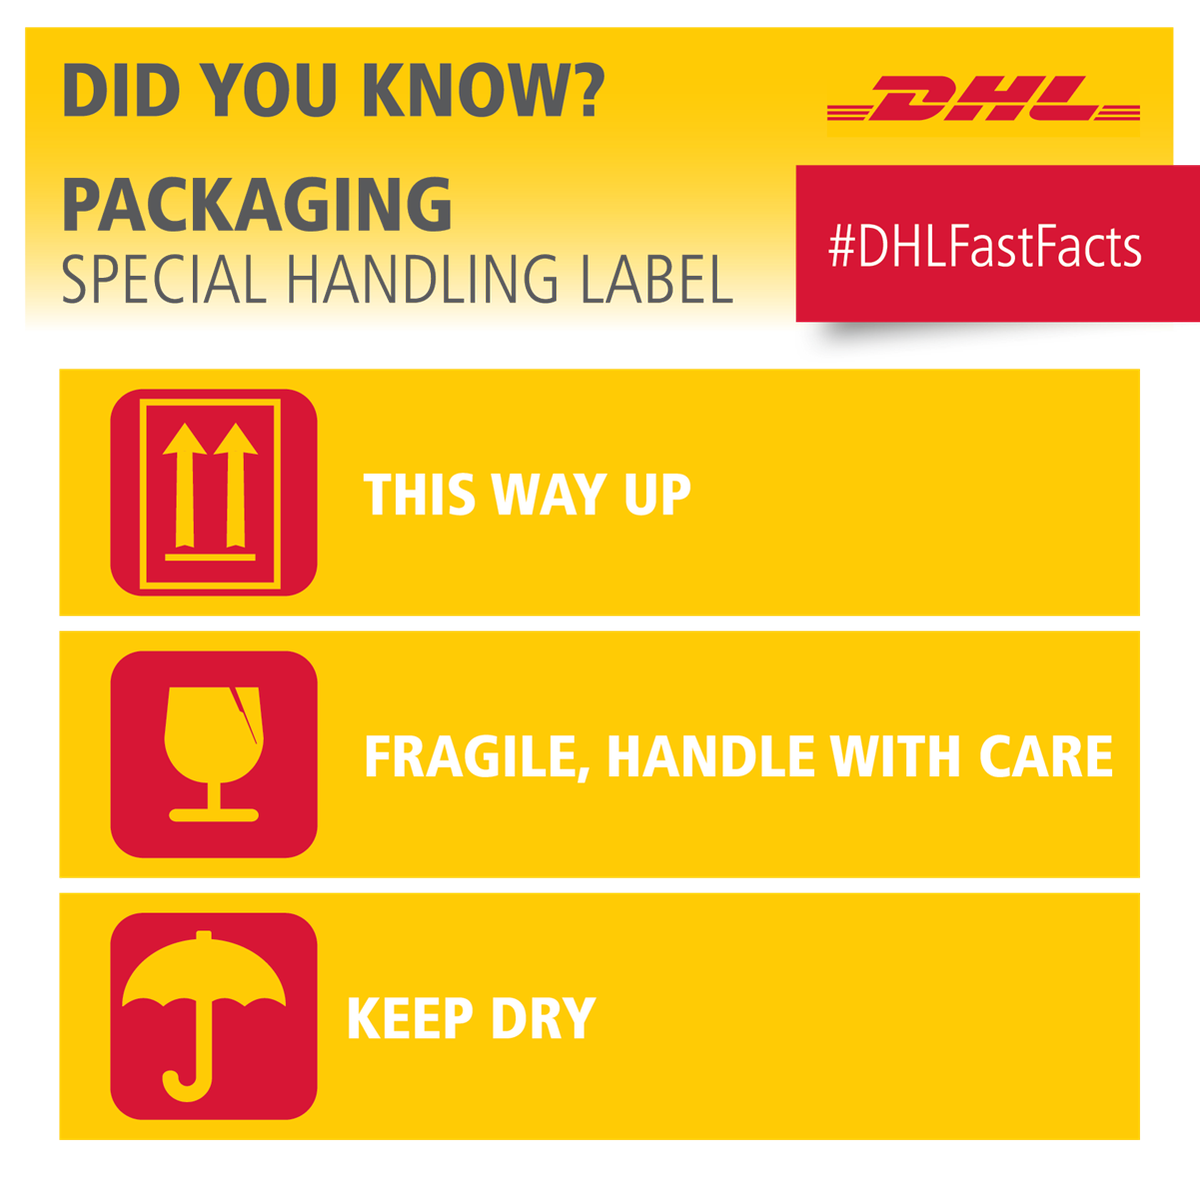 Dhl Africa Didyouknow About Our Special Handling Packaging Labels Learn What The Symbols Below Mean Dhlfastfacts Dhldeliver